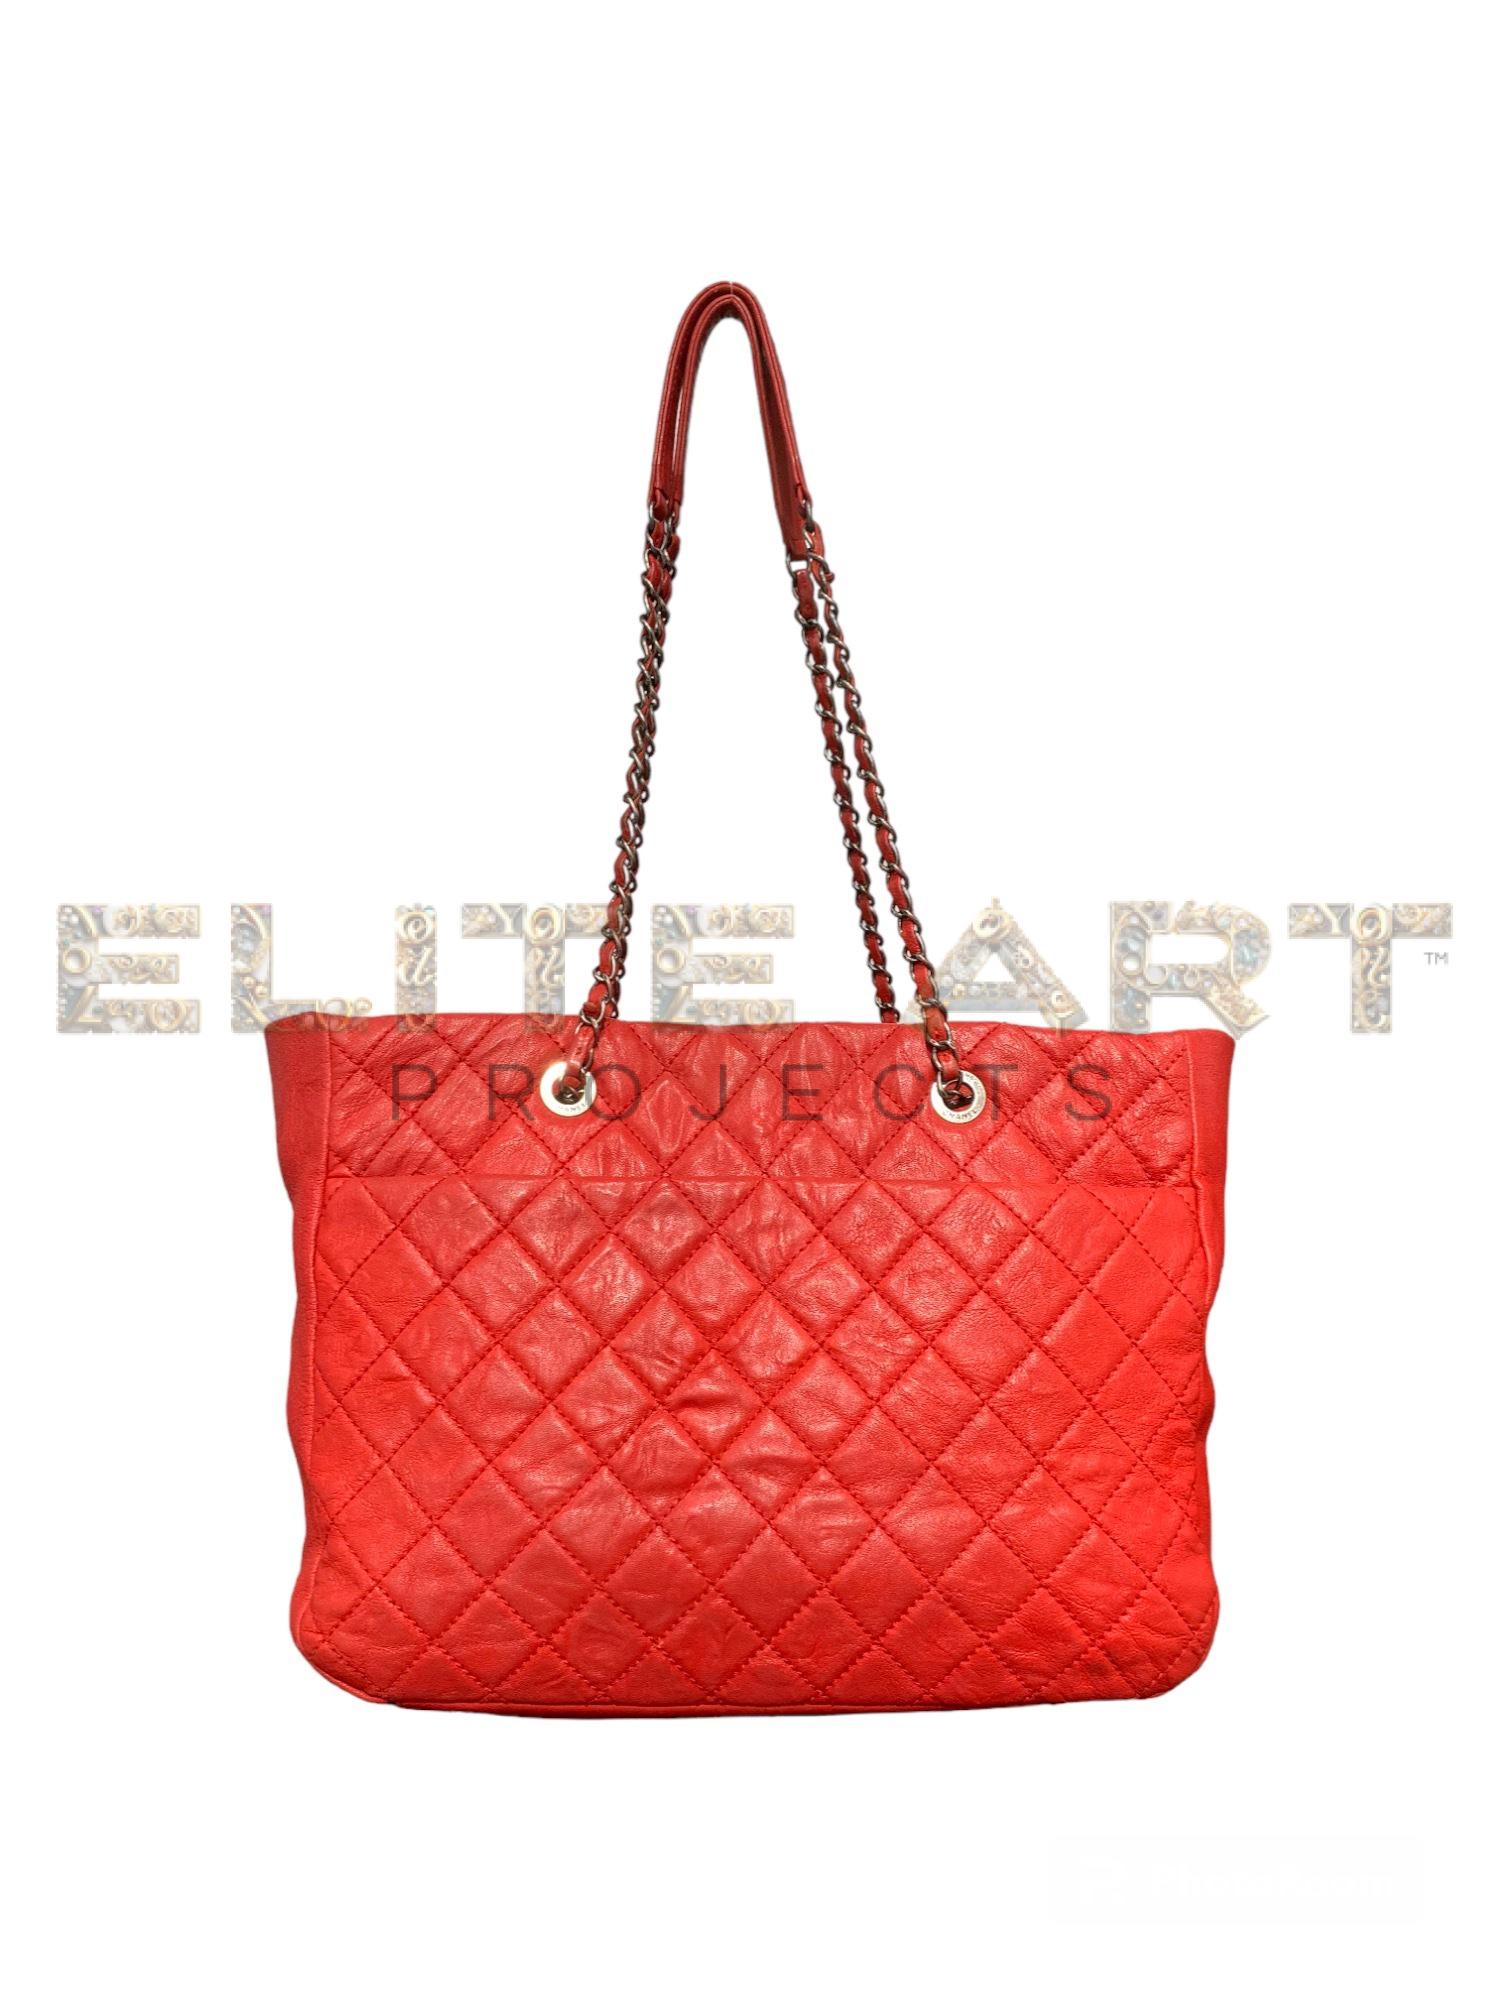 Chanel, shopper bag, red leather, silver accents, quilted, spacious interior, zip closure, front pocket, back pocket